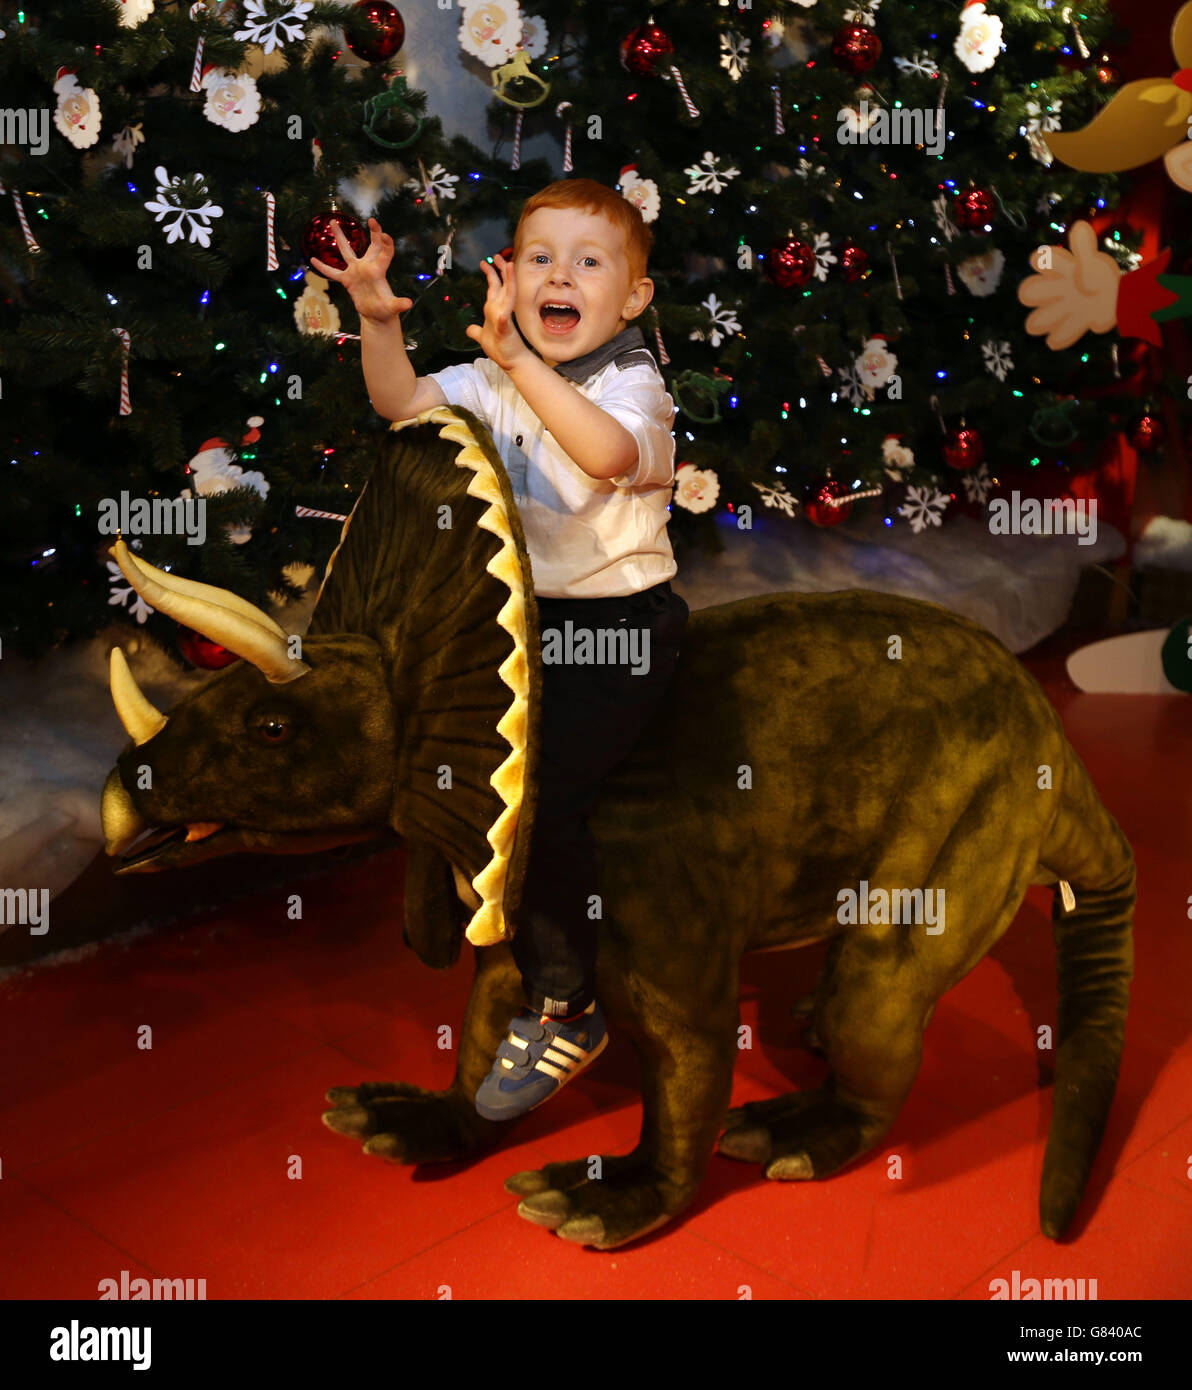 Four-year-old Tristan (no surname given) plays with a Triceratops sit-on dinosaur as Hamleys launches its Christmas toy range in central London. Even the youngest children will need their technological know-how up to speed when Father Christmas visits this year, according to the top toy predictions from Hamleys. Stock Photo